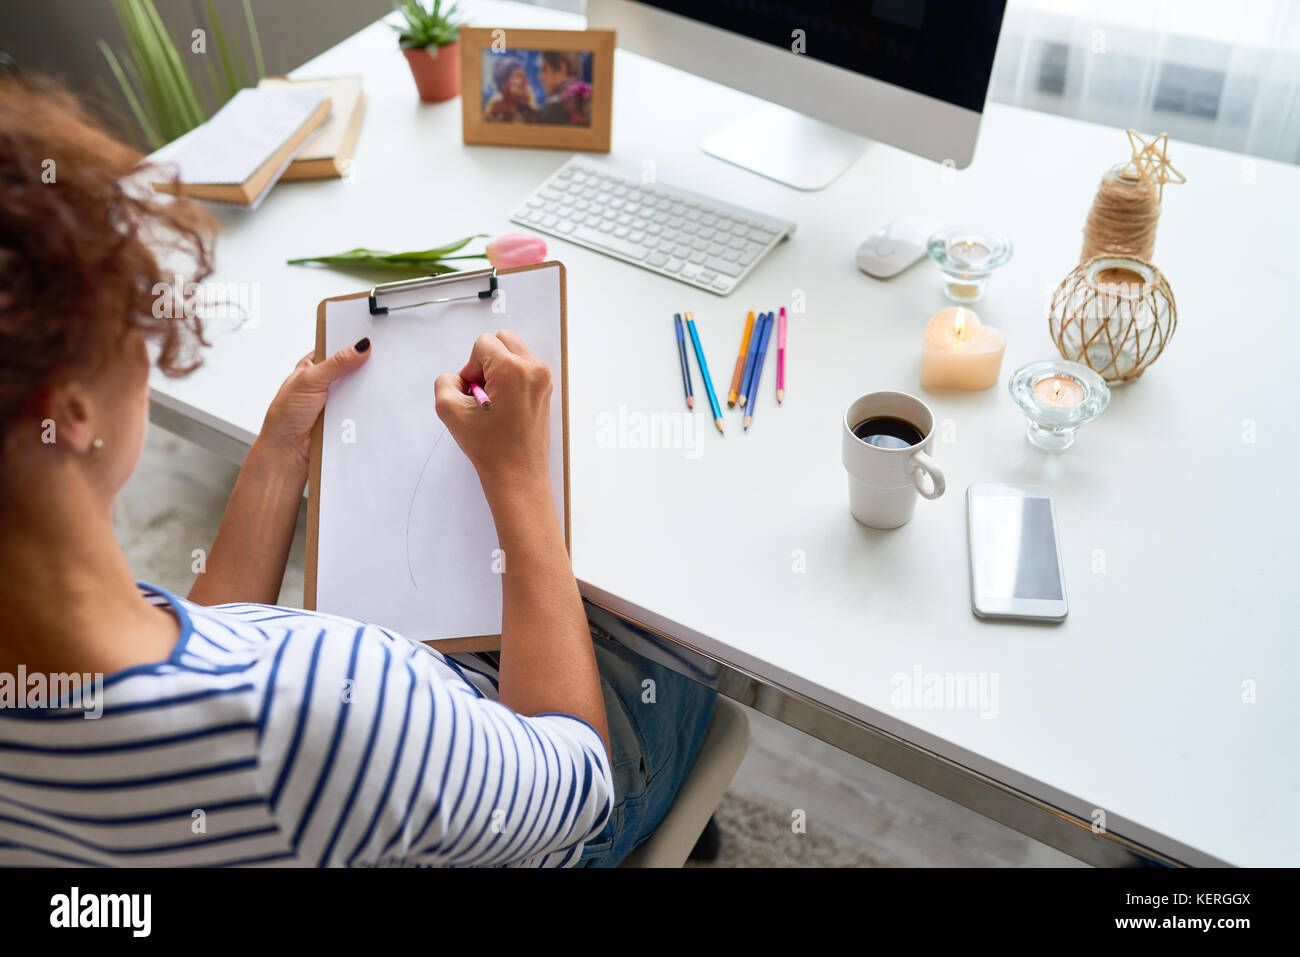 High Angle Of Creative Young Woman Writing Ideas Or Sketching On